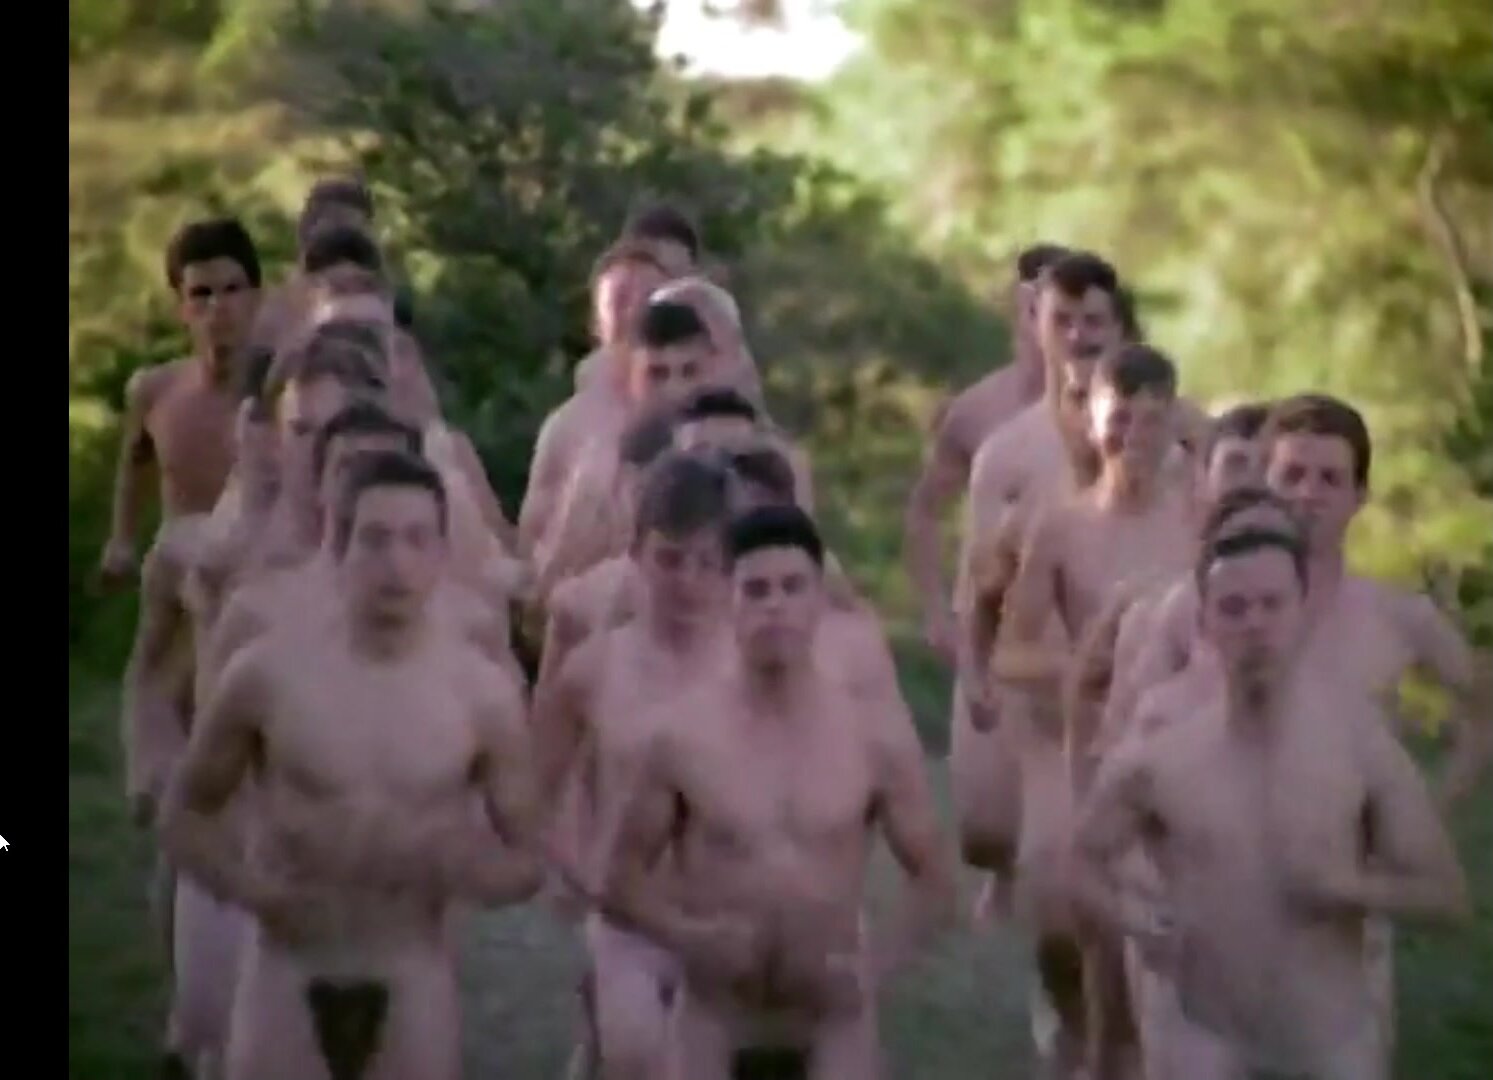 Multiple young men naked in a Brazilian movie (1976)